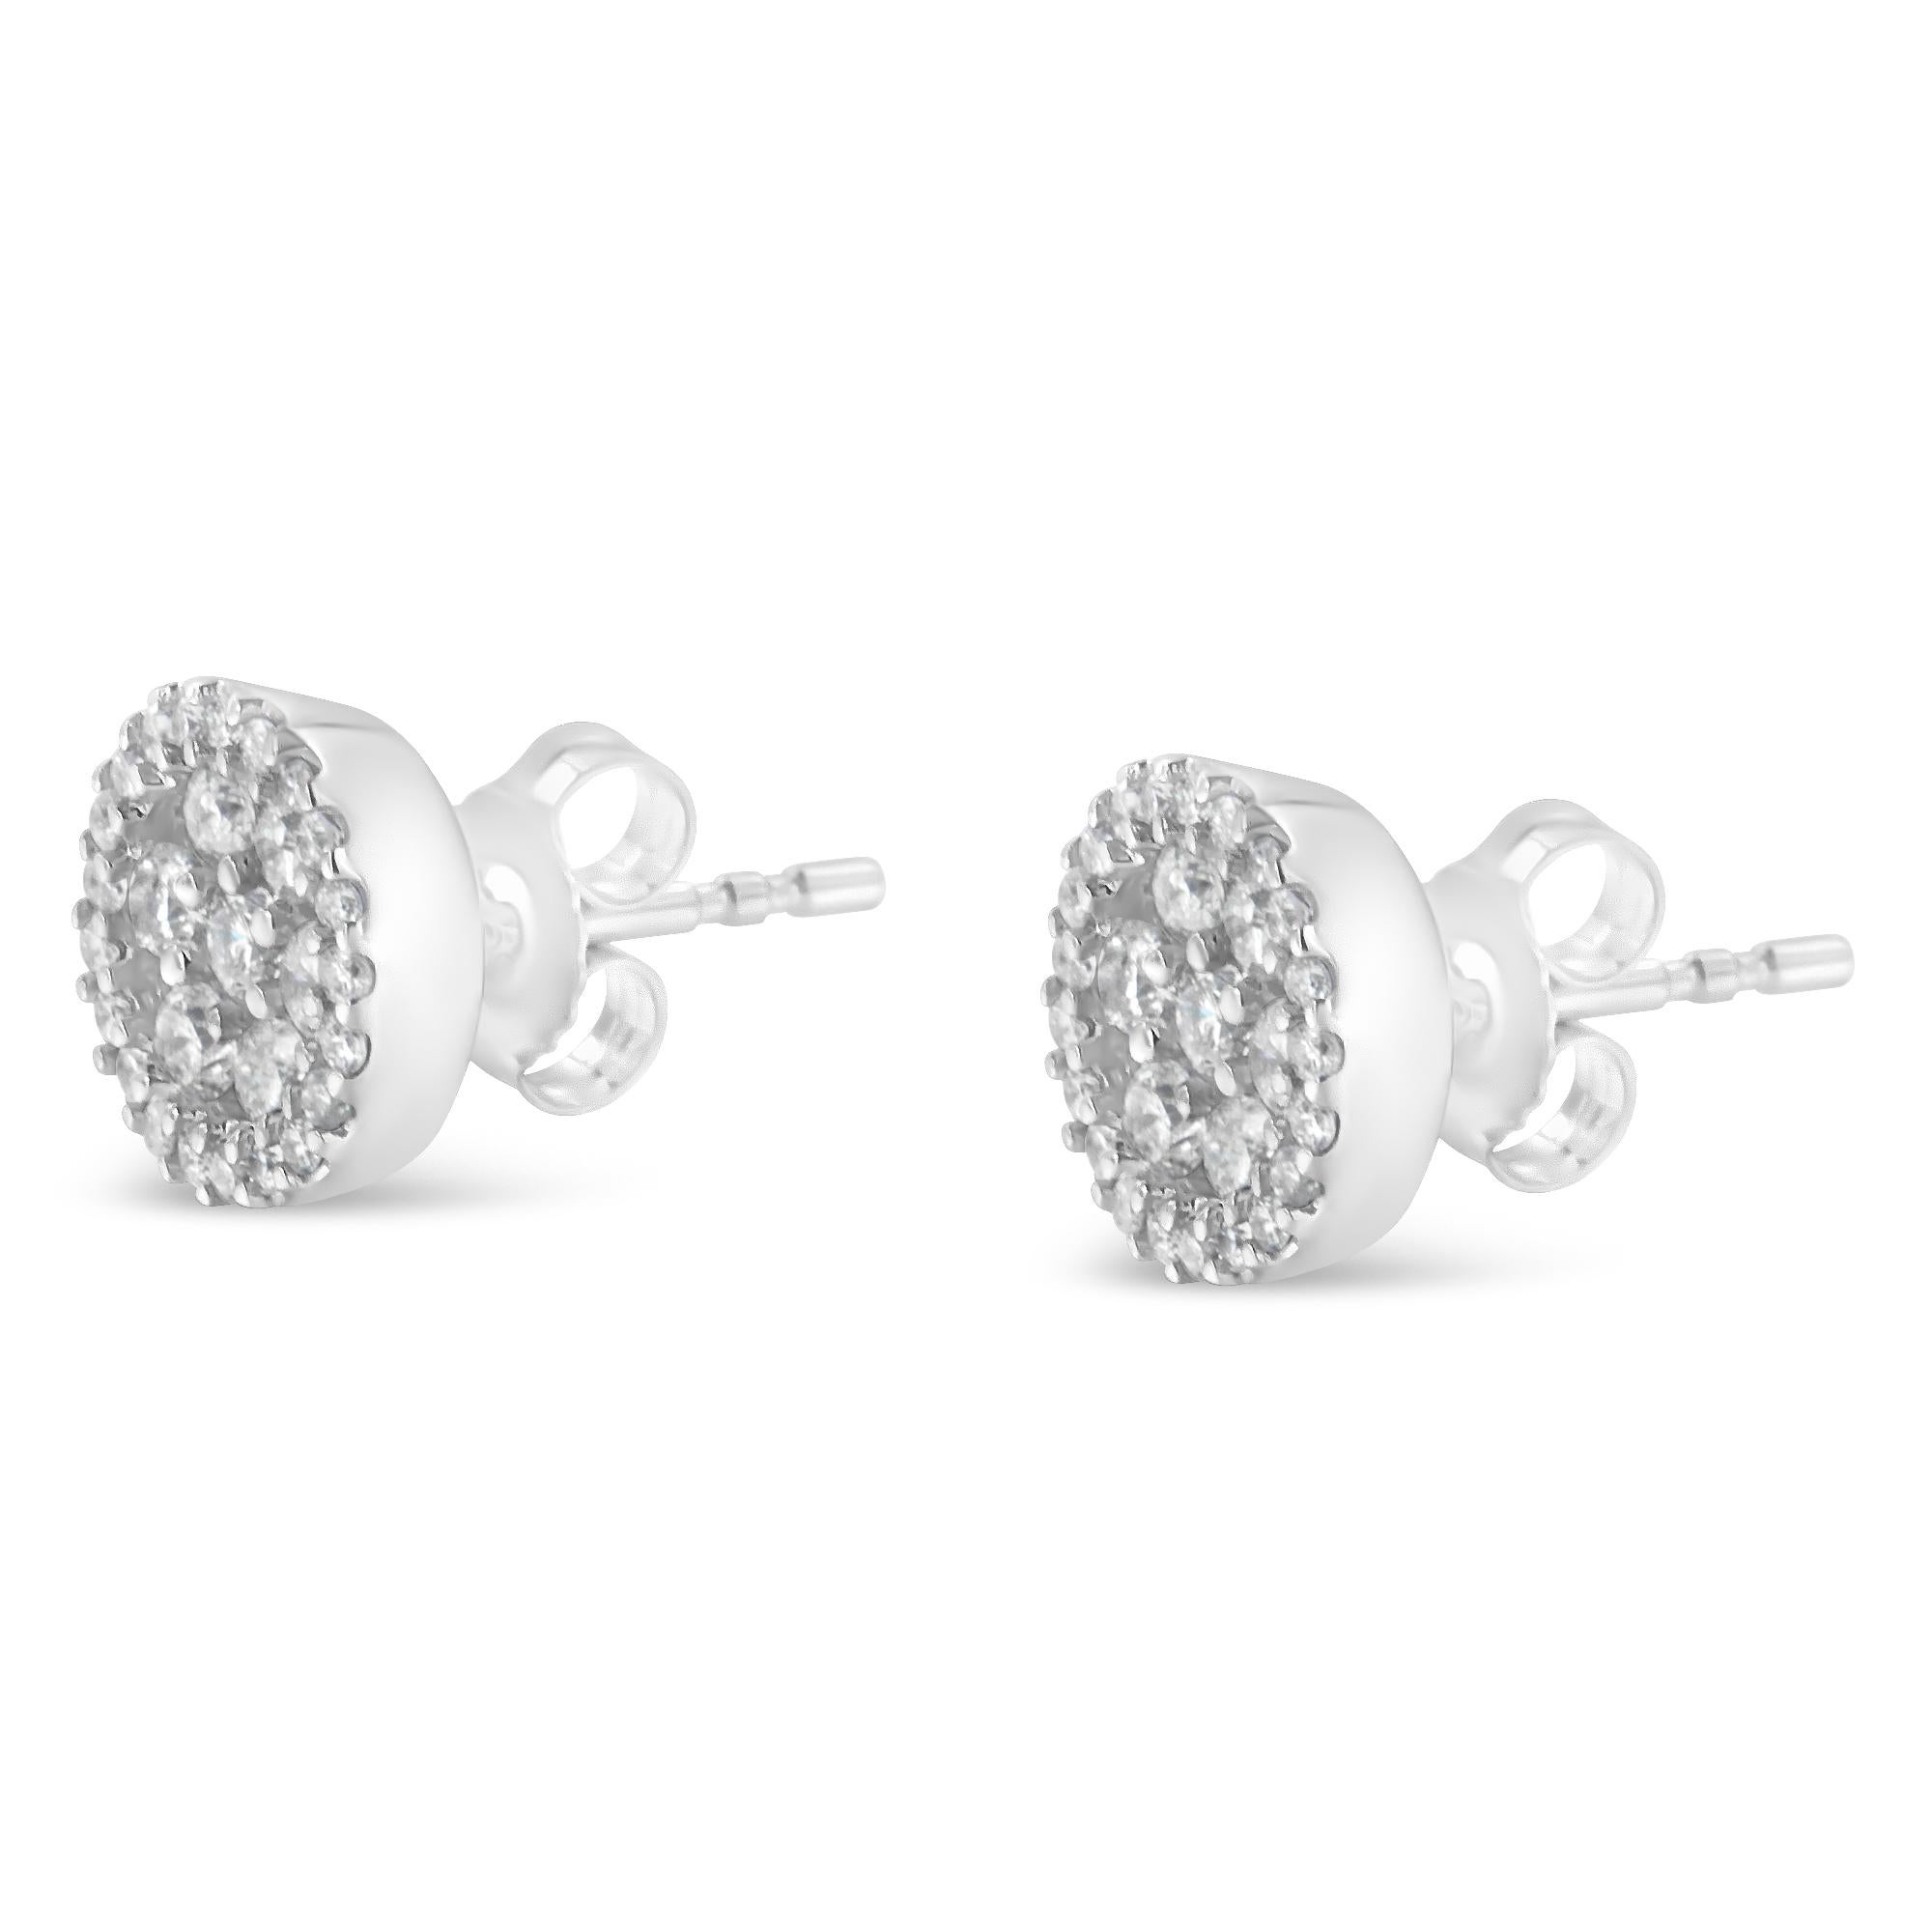 Round Cut AGS Certified 14K White Gold 1.0 Carat Diamond Halo-Style Cluster Stud Earrings For Sale